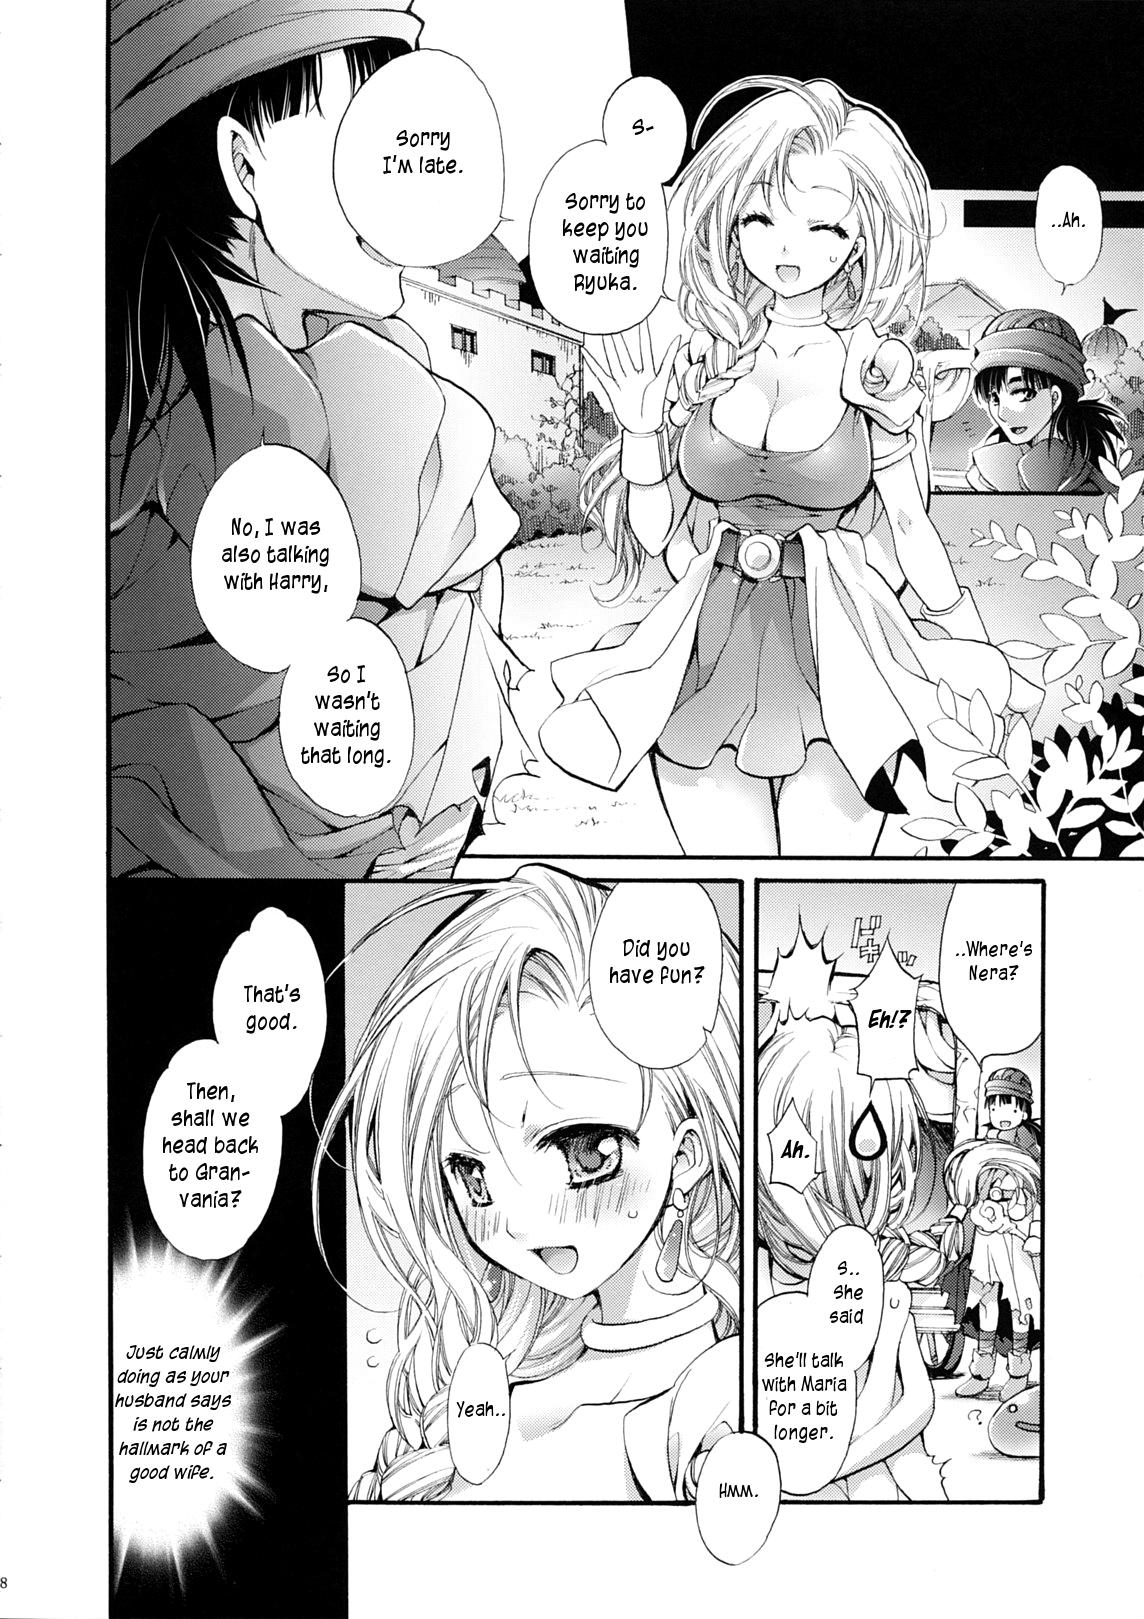 Butt Hitomi no Naka no Sora | The Sky In Your Eyes - Dragon quest v Rough Sex - Page 7